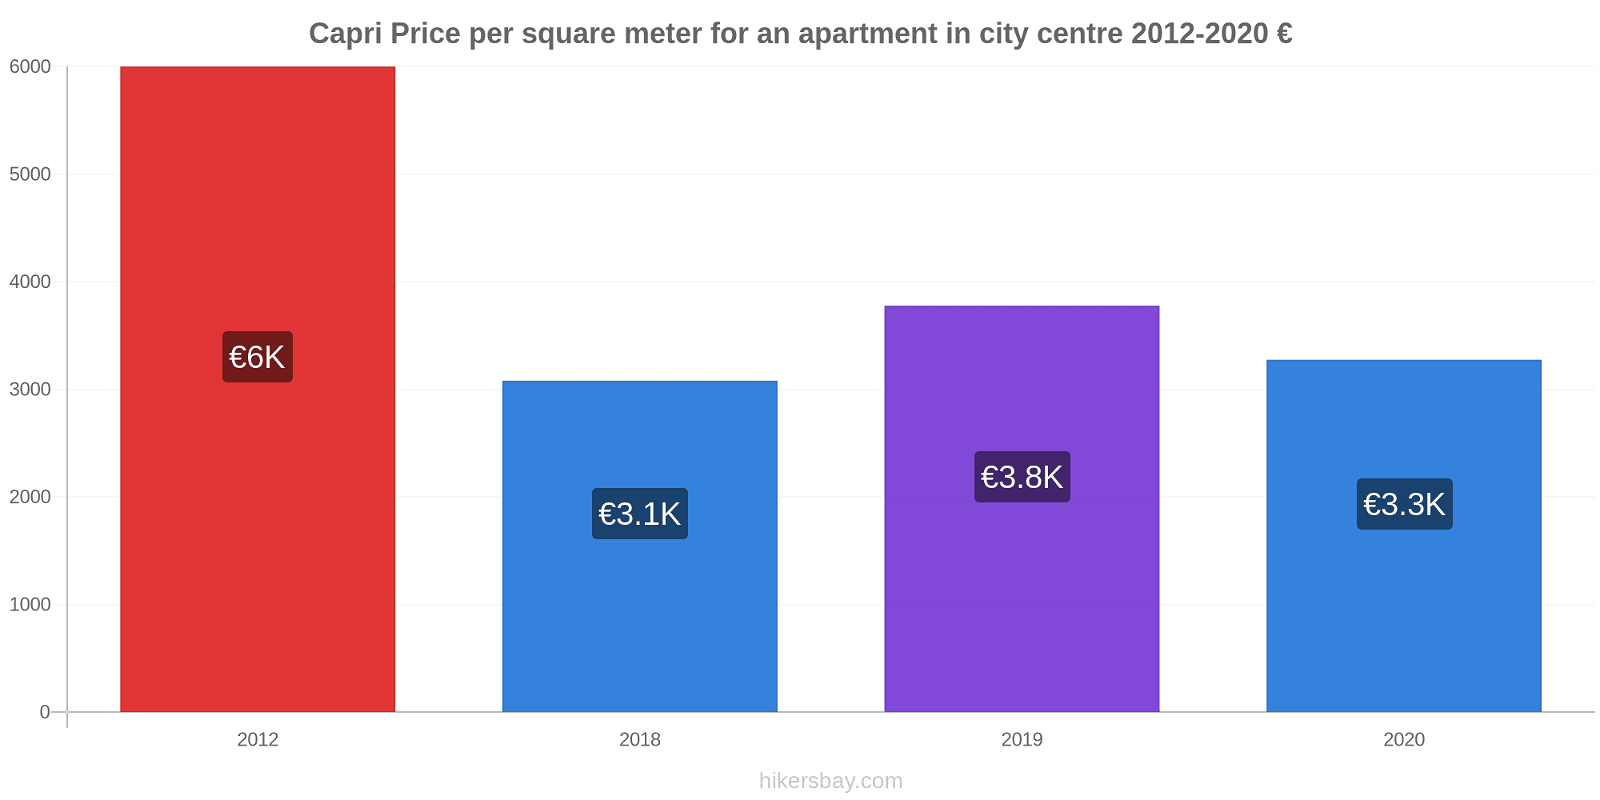 Capri price changes Price per square meter for an apartment in city centre hikersbay.com